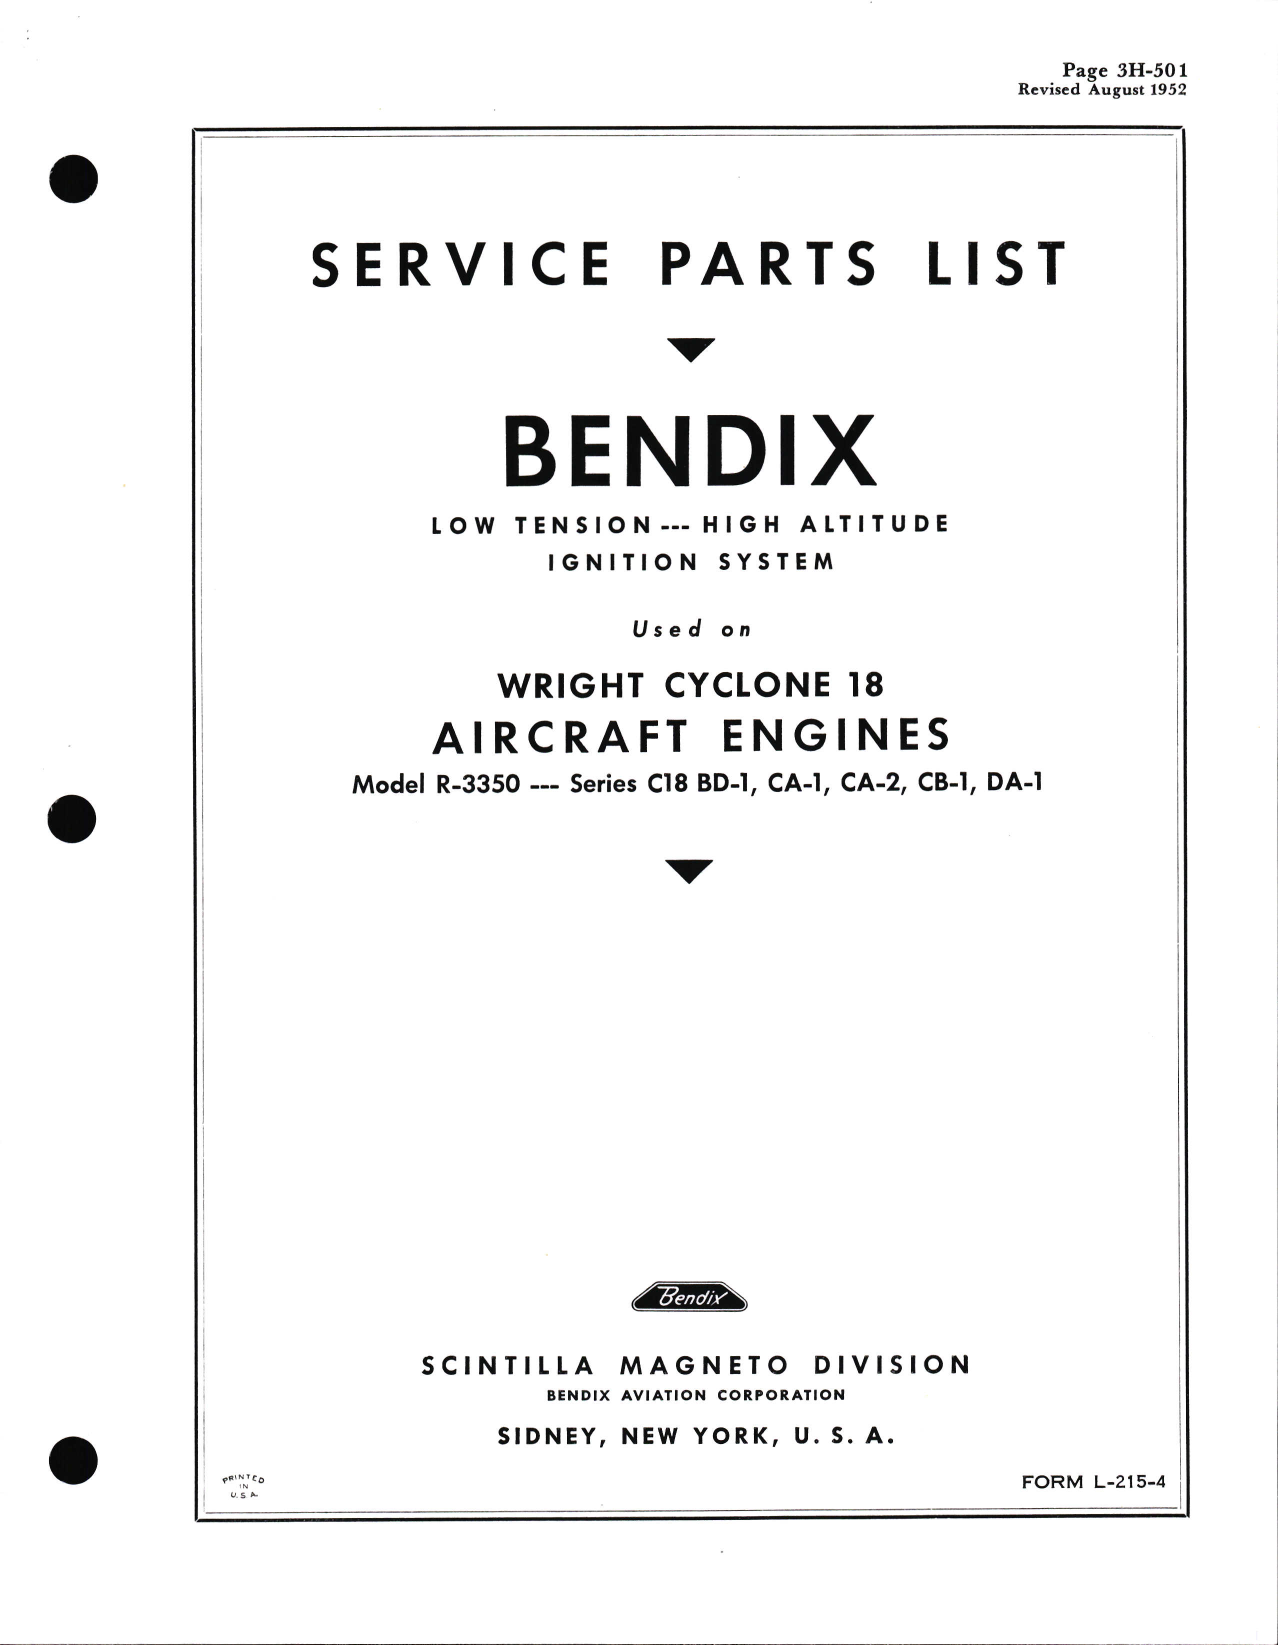 Sample page 1 from AirCorps Library document: Service Parts List for Bendix Low Tension - High Altitude Ignition for Wright R-3350